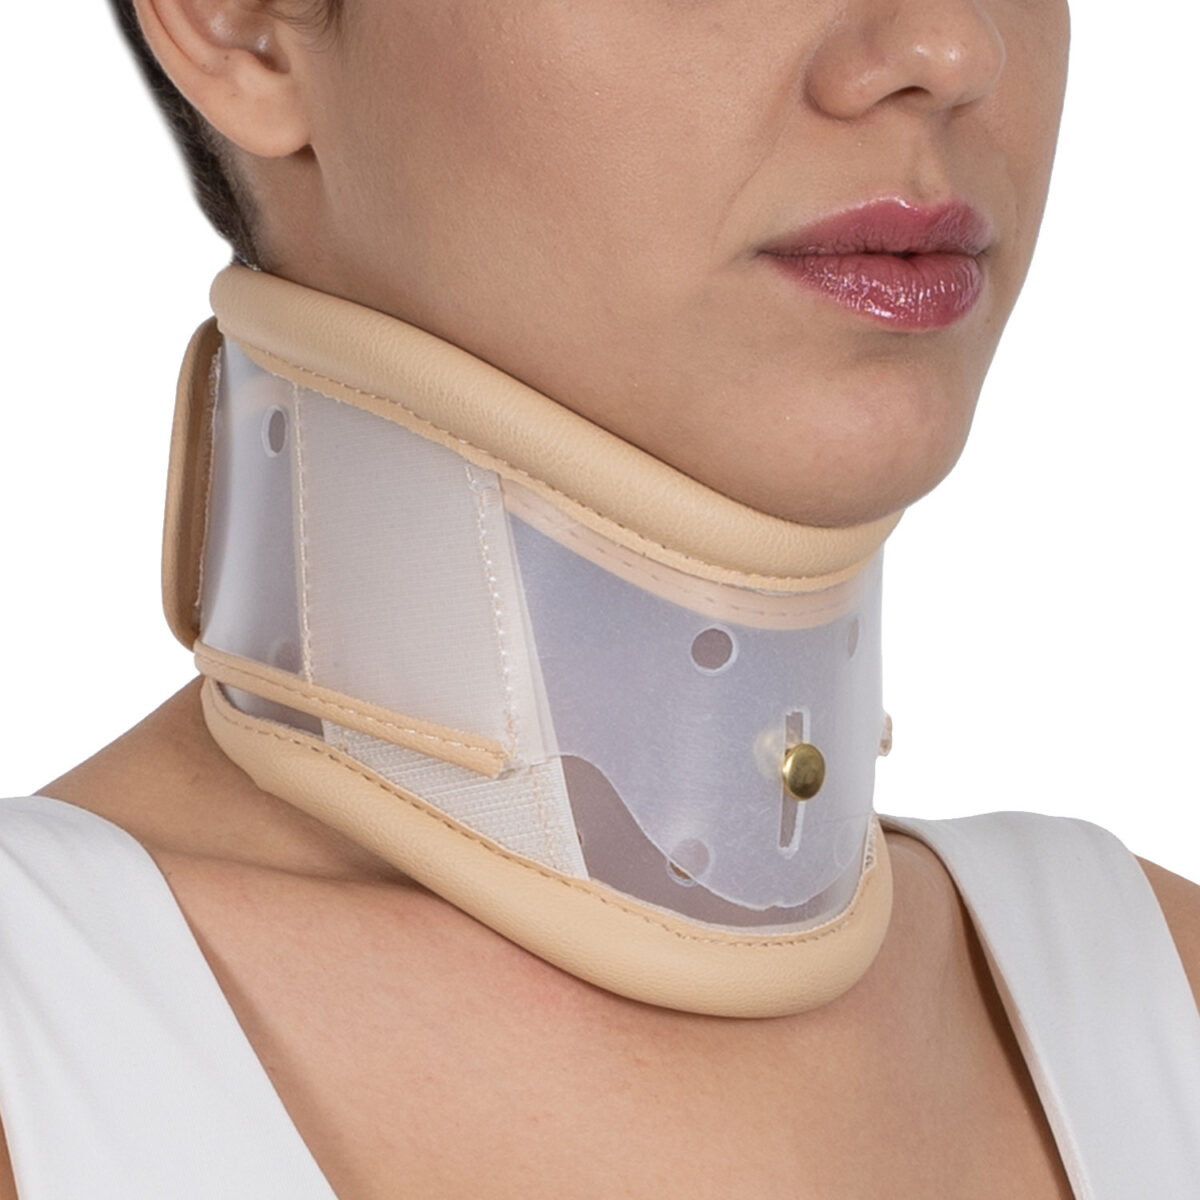 wingmed orthopedic equipments W108 adjustable pvc cervical collar product 4 1